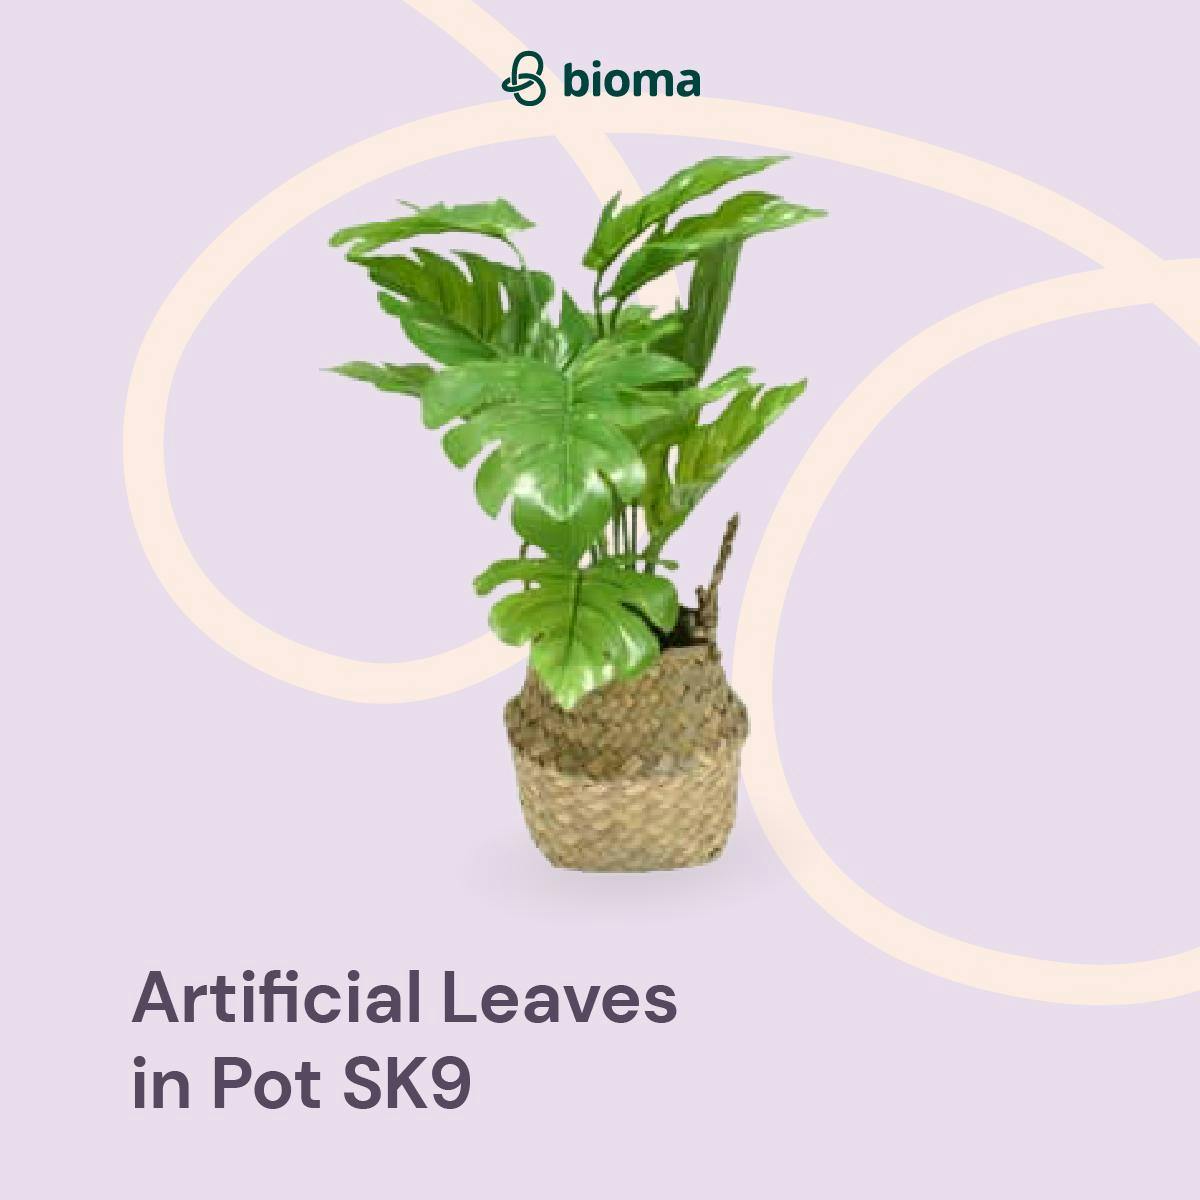 Image 381 Artificial Leaves in Pot SK9